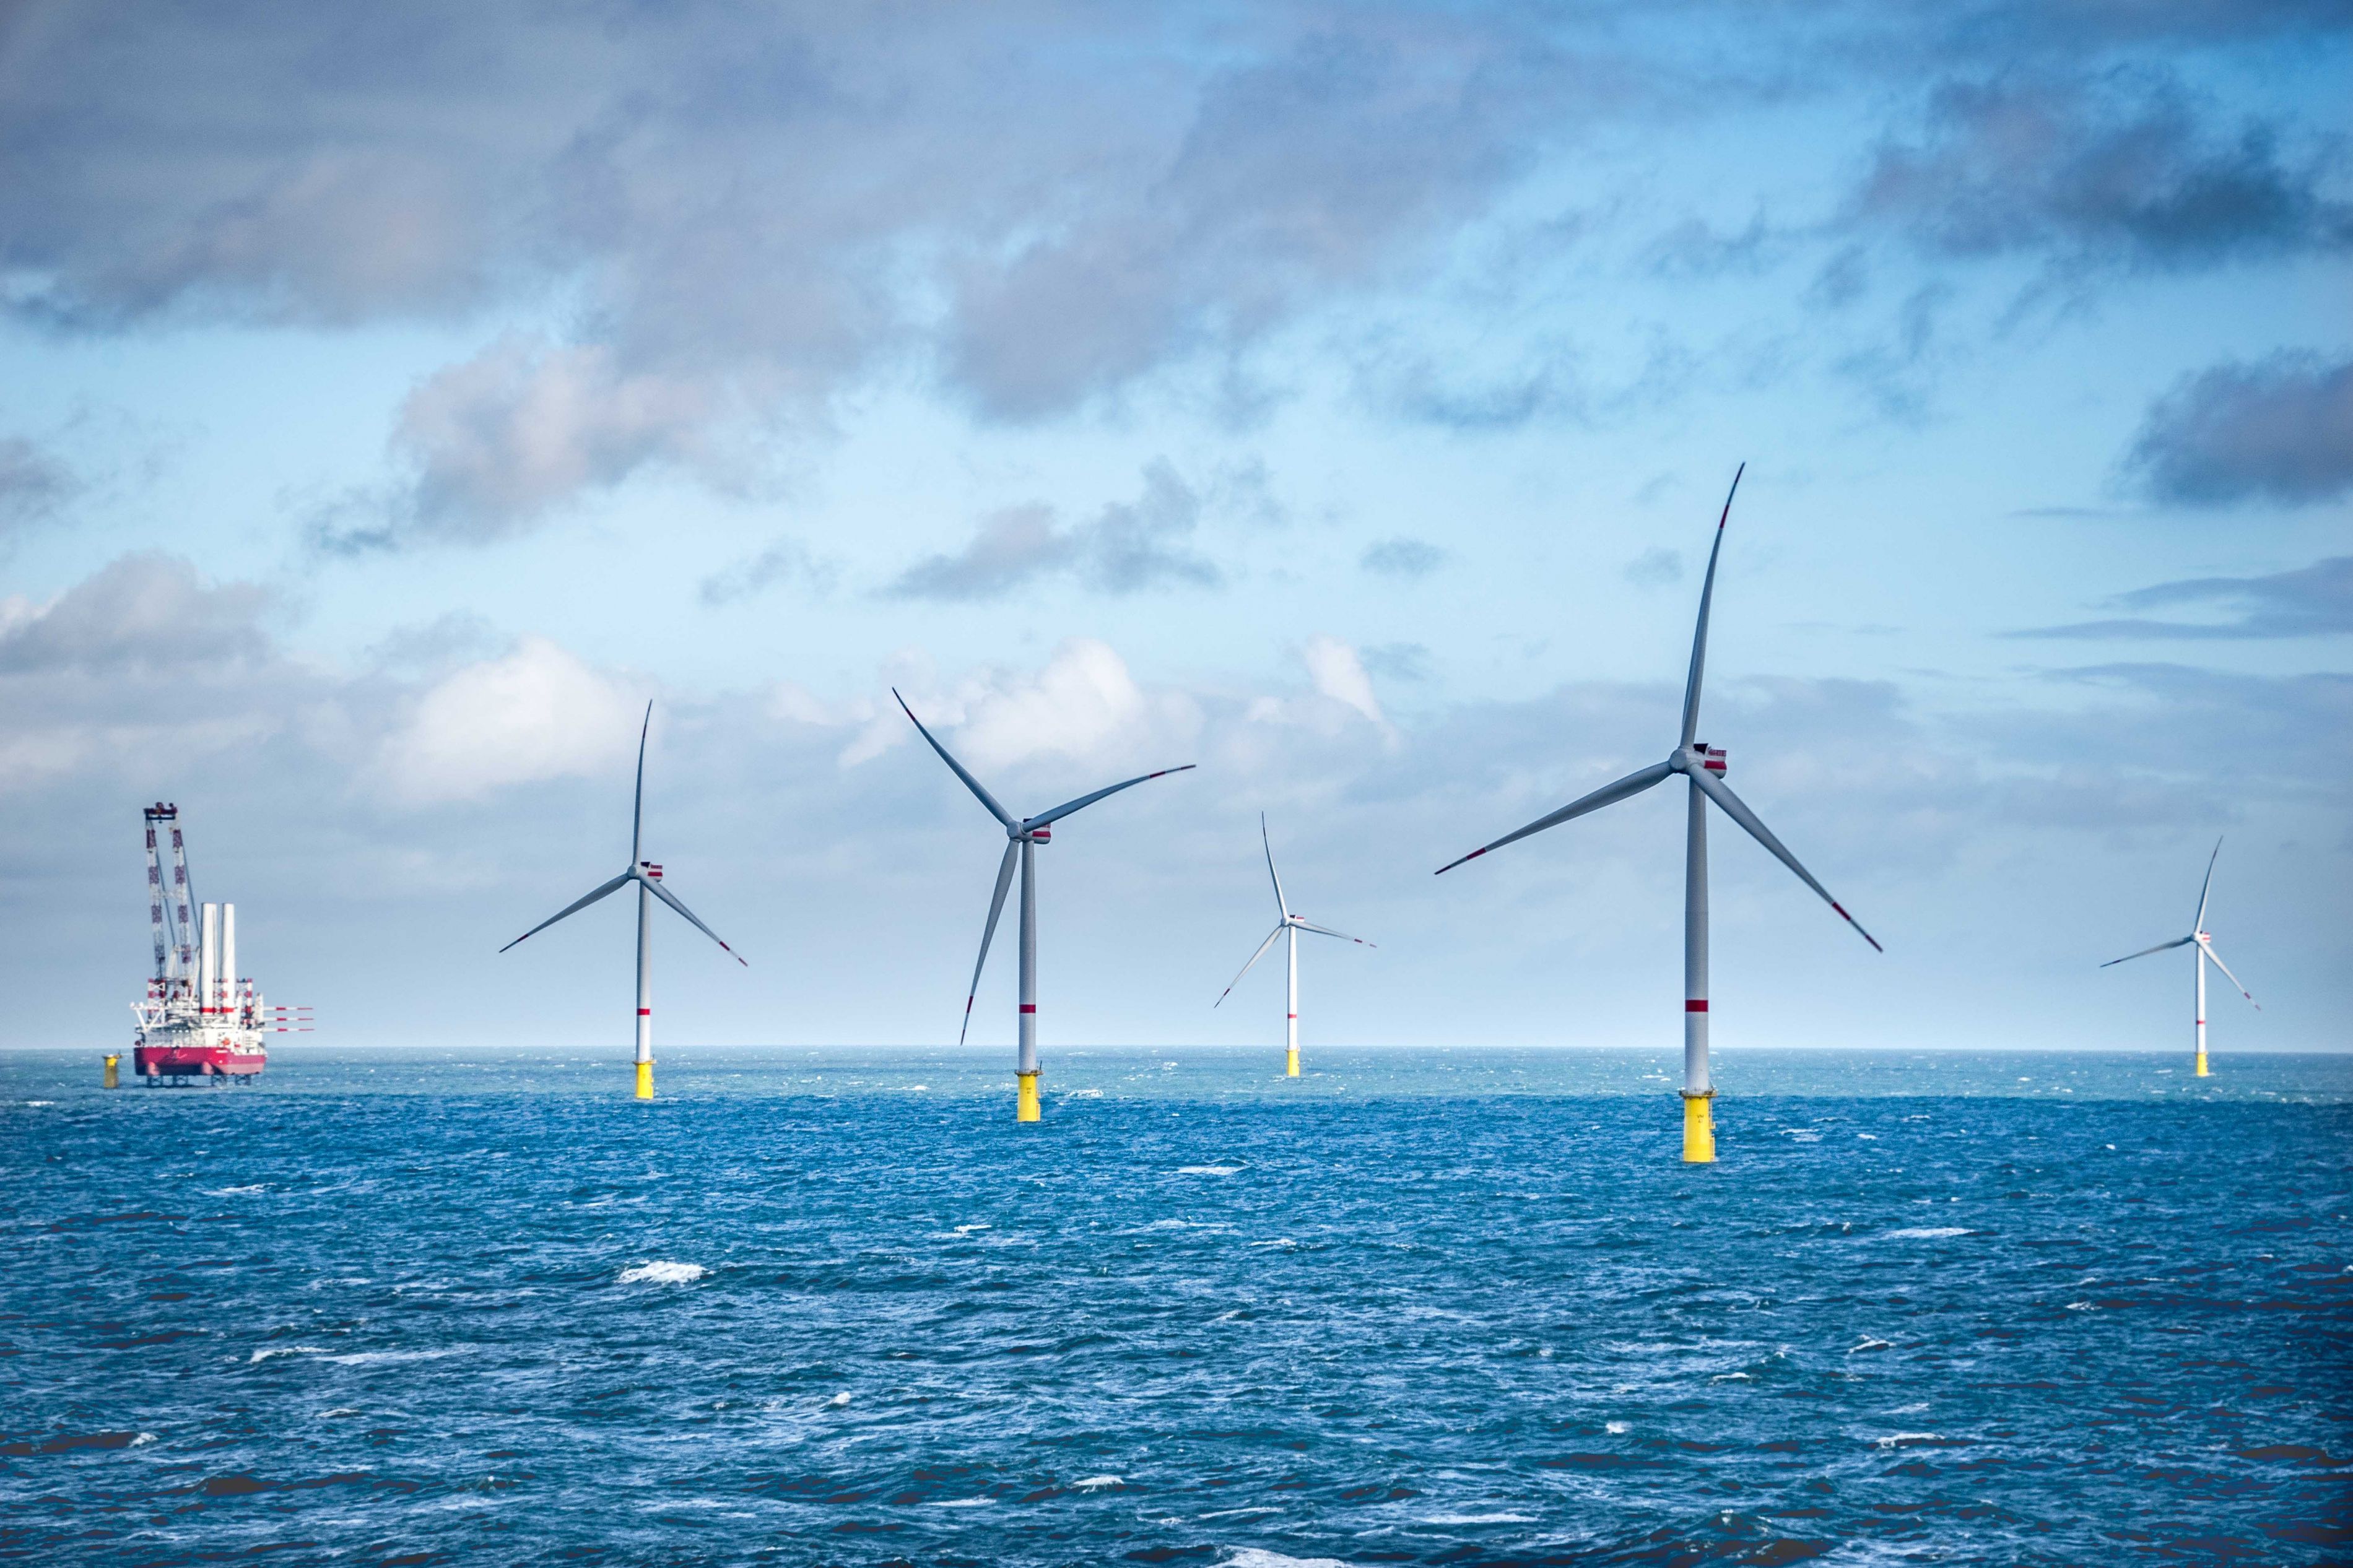 Five wind turbines in a body of water with a boat in the background - Becoming a rock solid investment for offshore wind energy.” investment for offshore wind energy